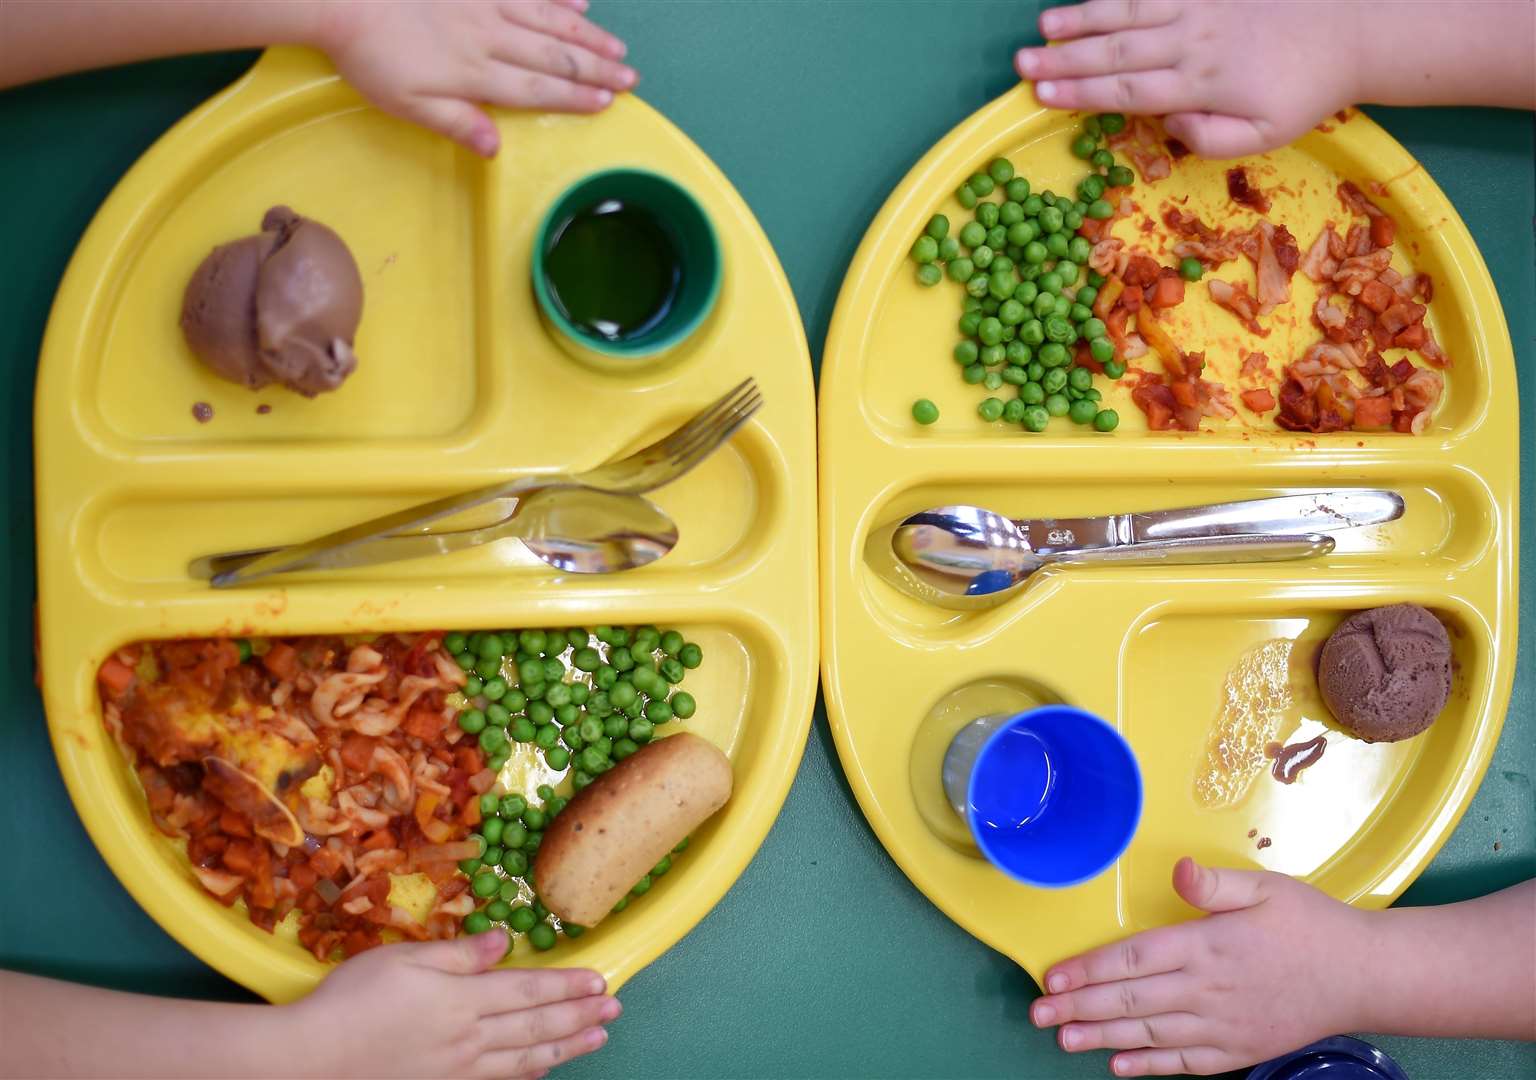 Highland Council is to issue shopping vouchers in place of free school meals from next week.